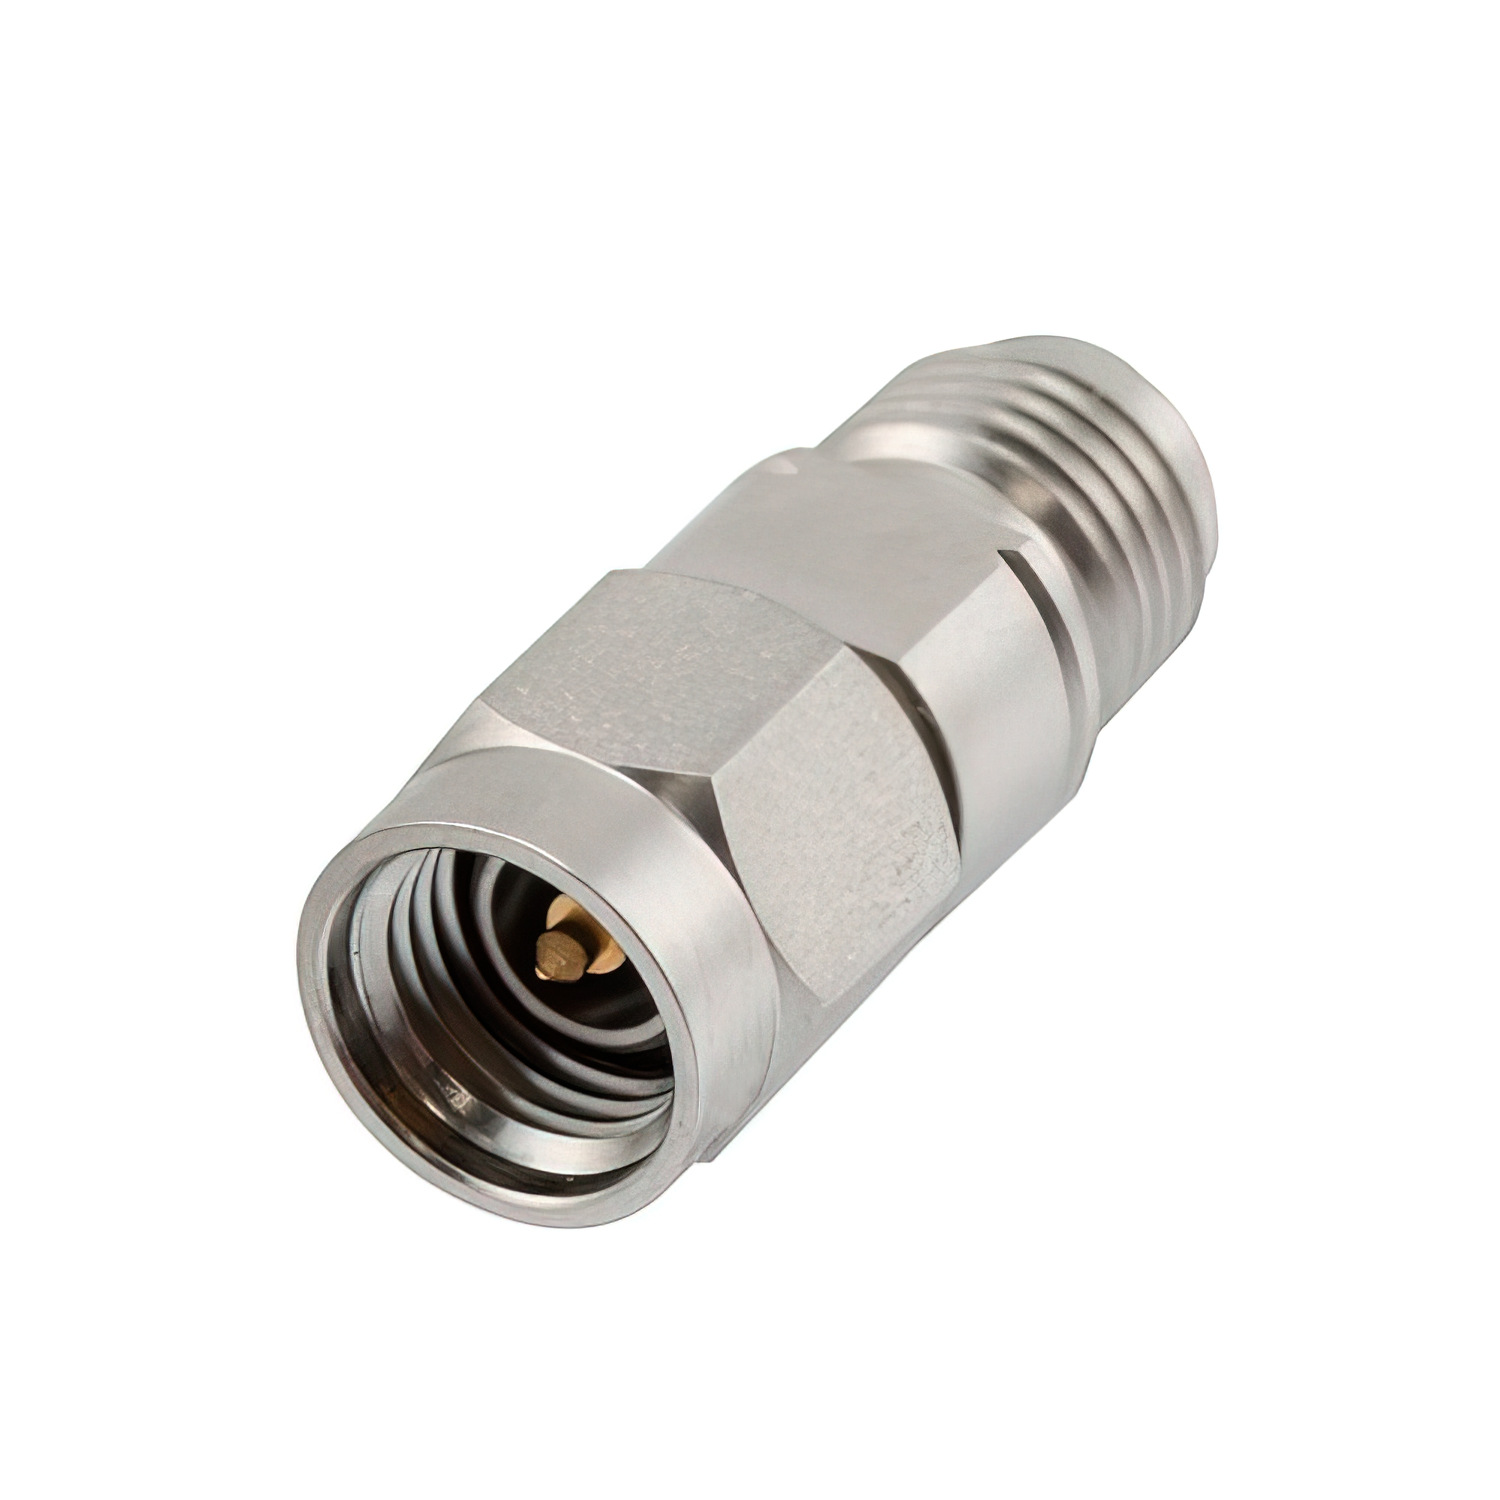 3.5mm male to 2.4mm female adapter1